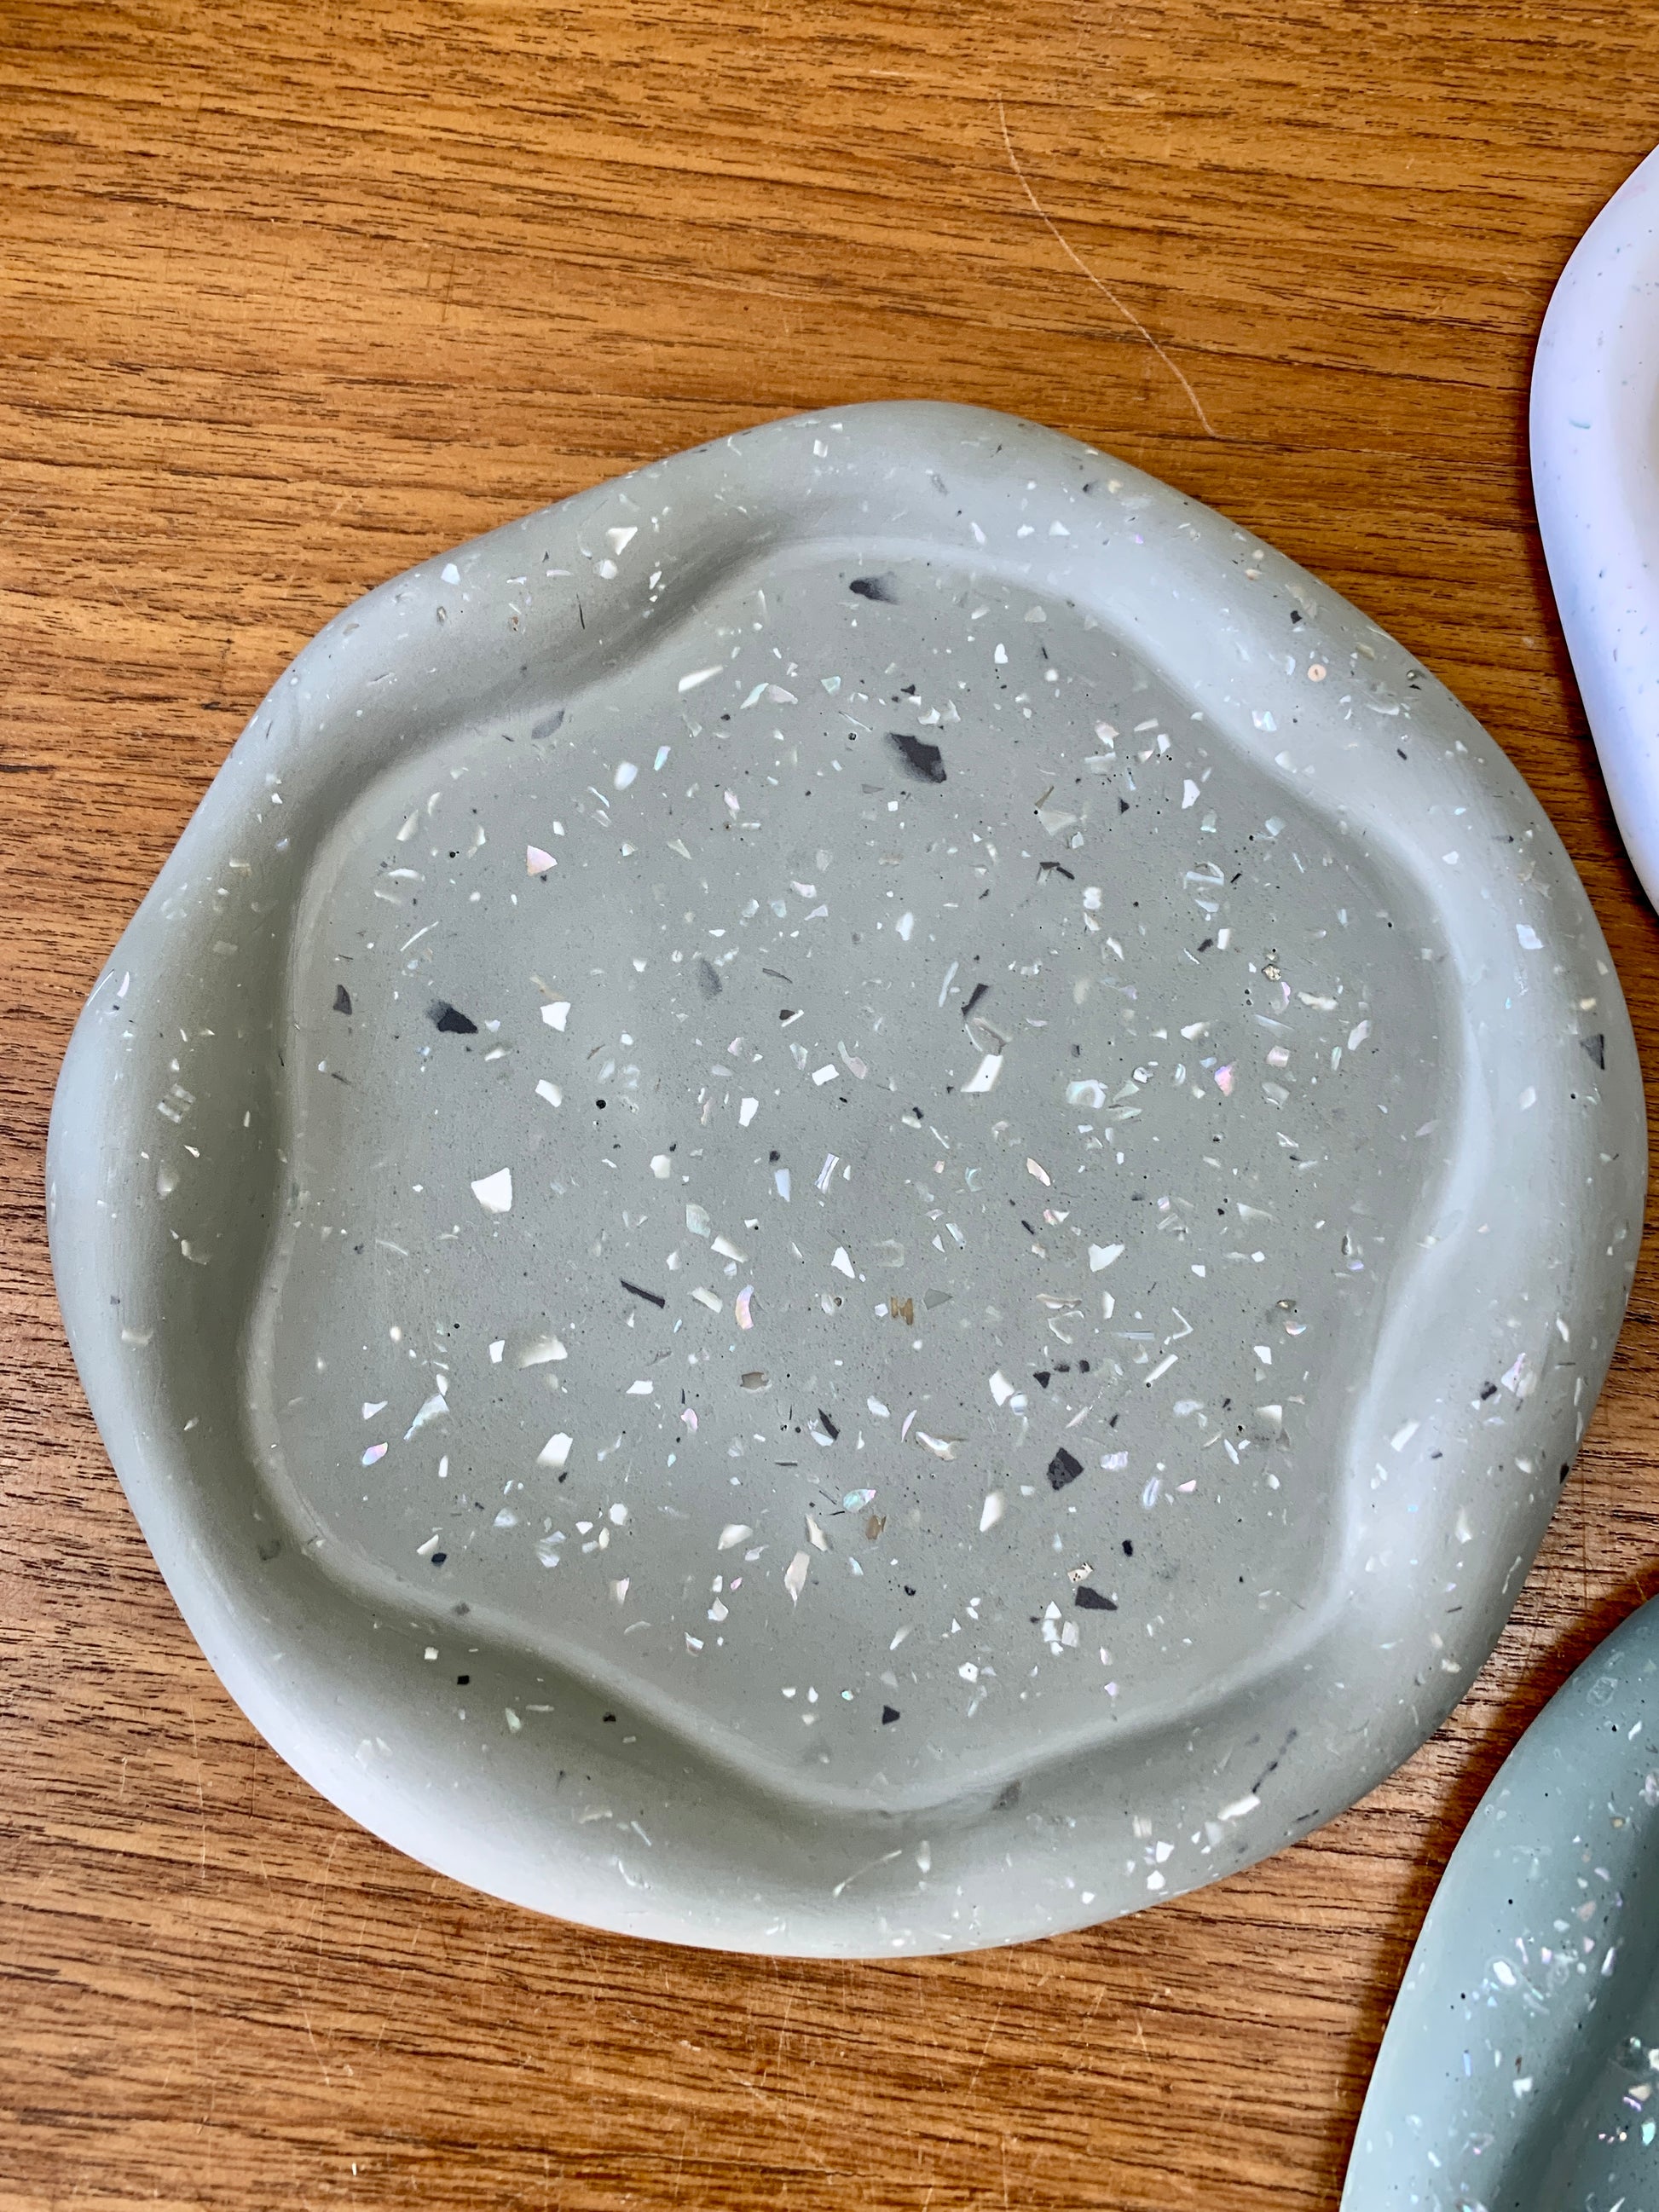 A wavy flat dish made from jesomite green with black and white flecks.